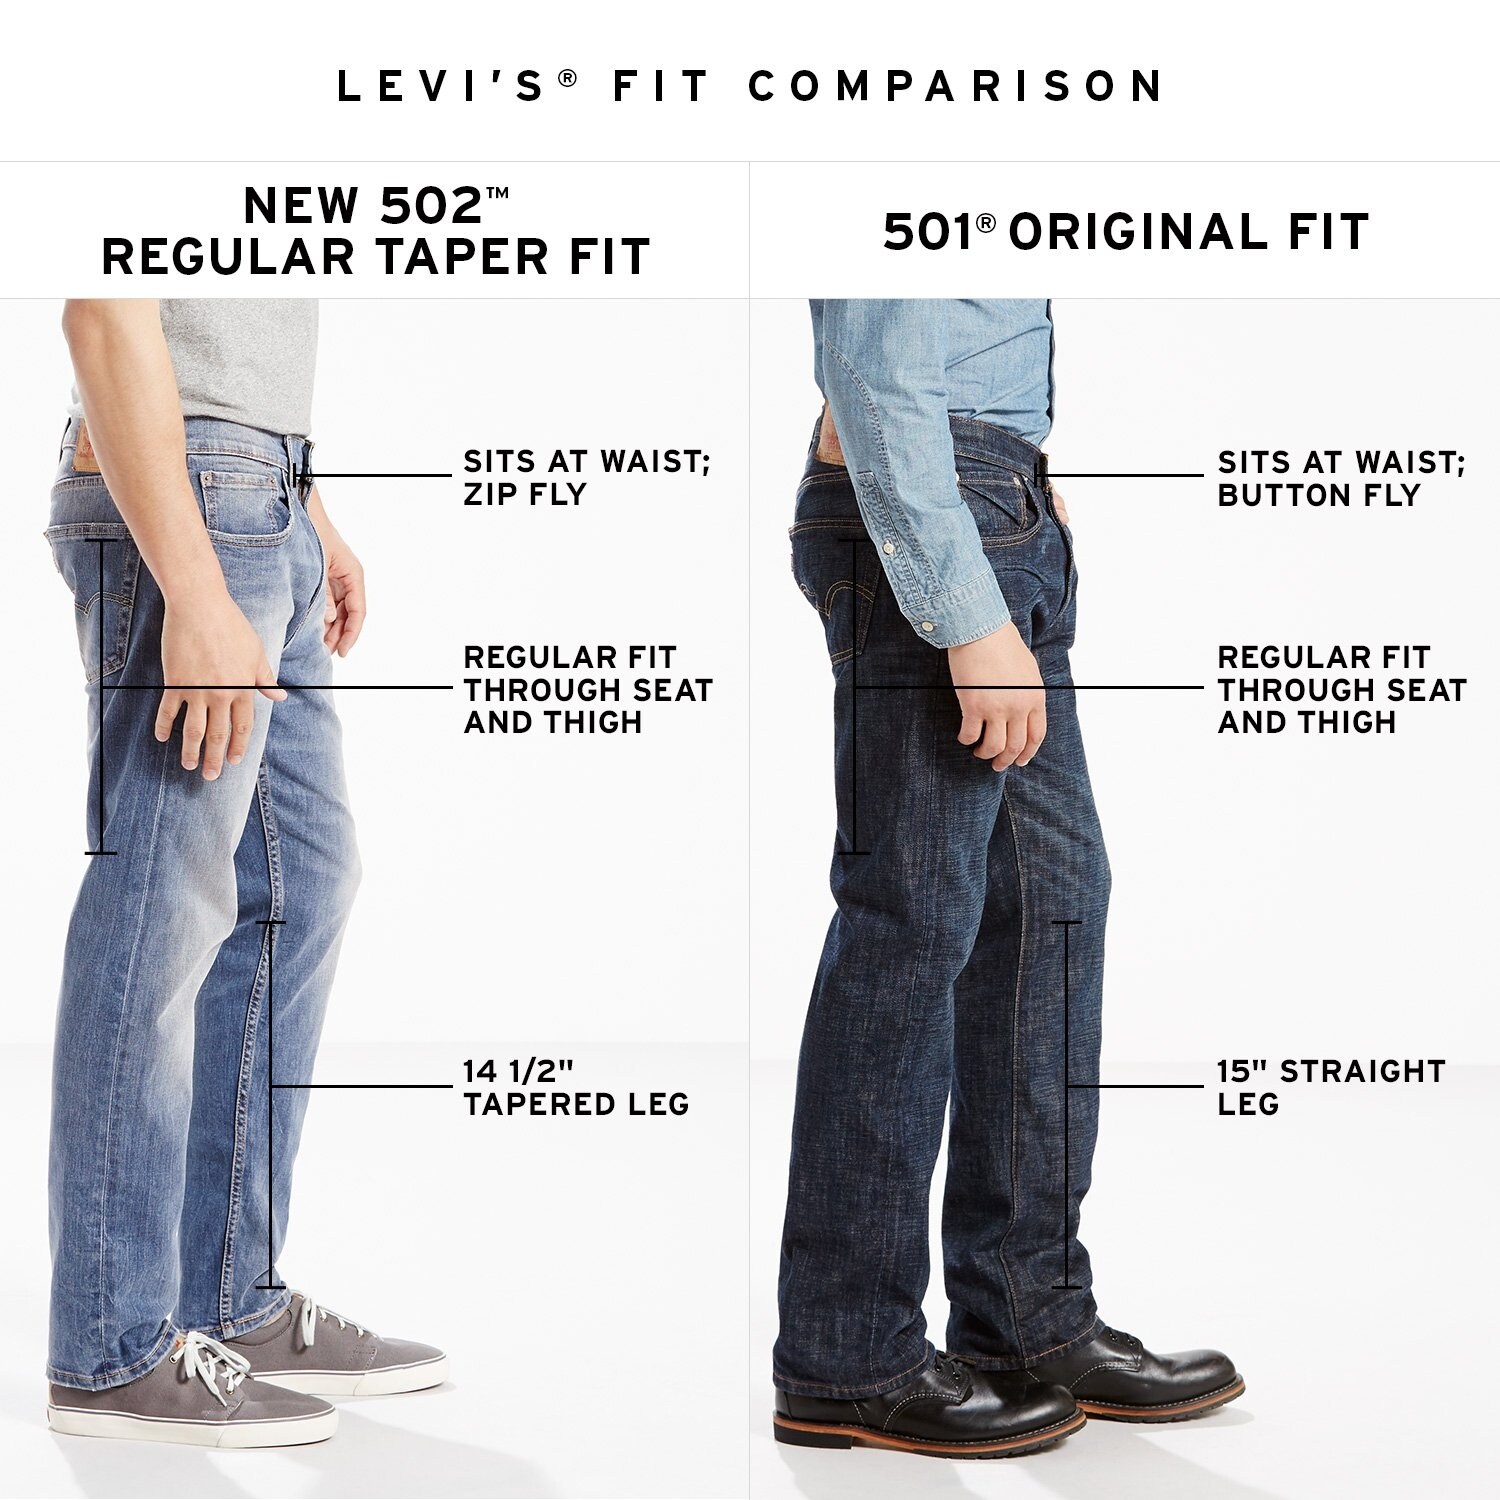 difference between levi's 501 and 502 